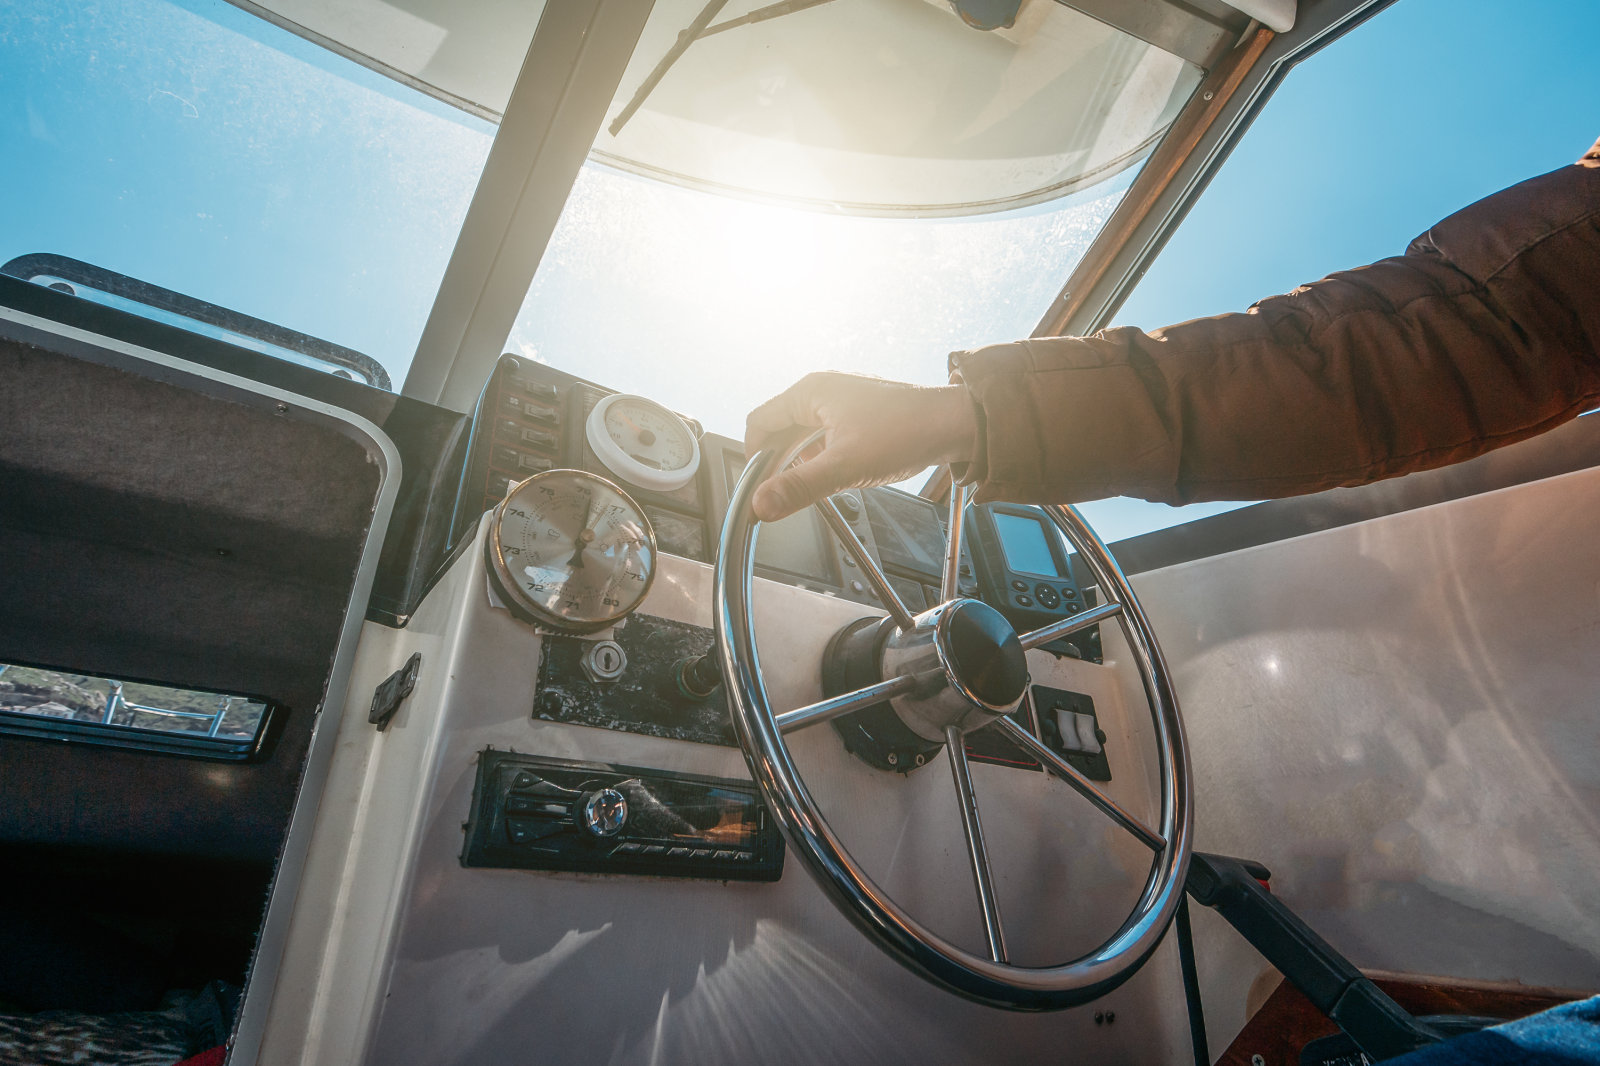 Recommend Some New Marine Steering Wheels!